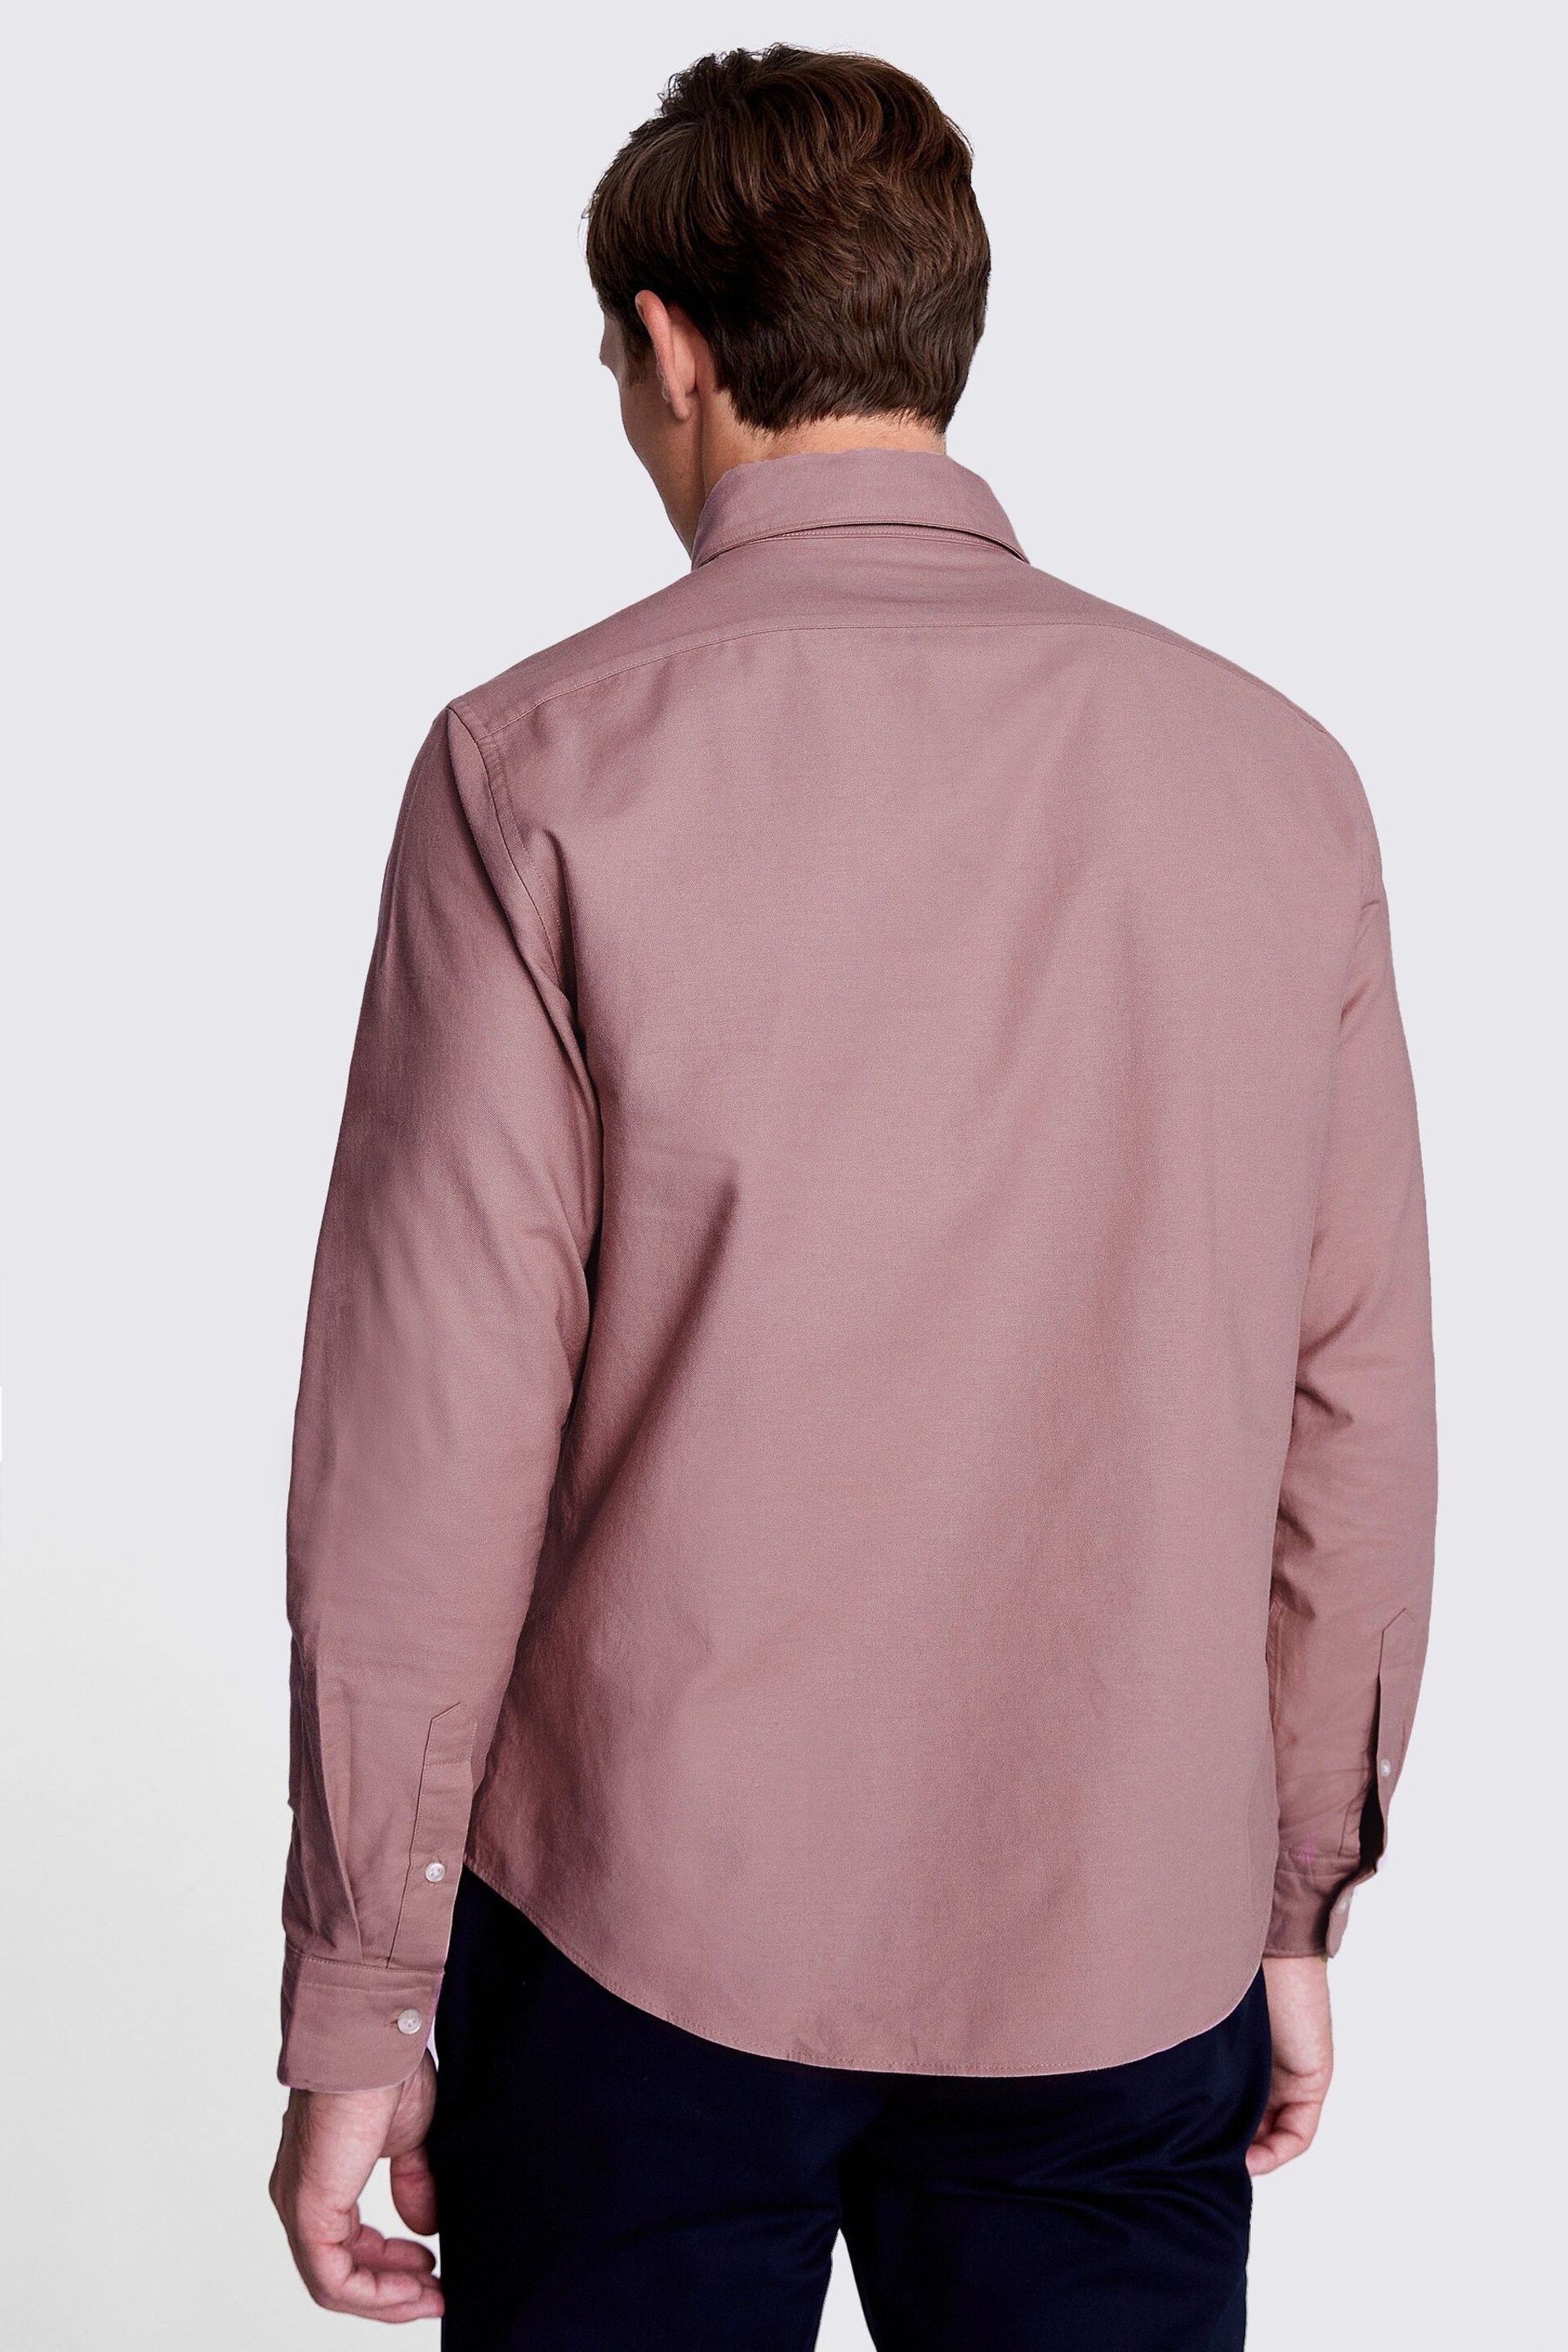 MOSS Pink Washed Oxford Shirt - Image 3 of 6